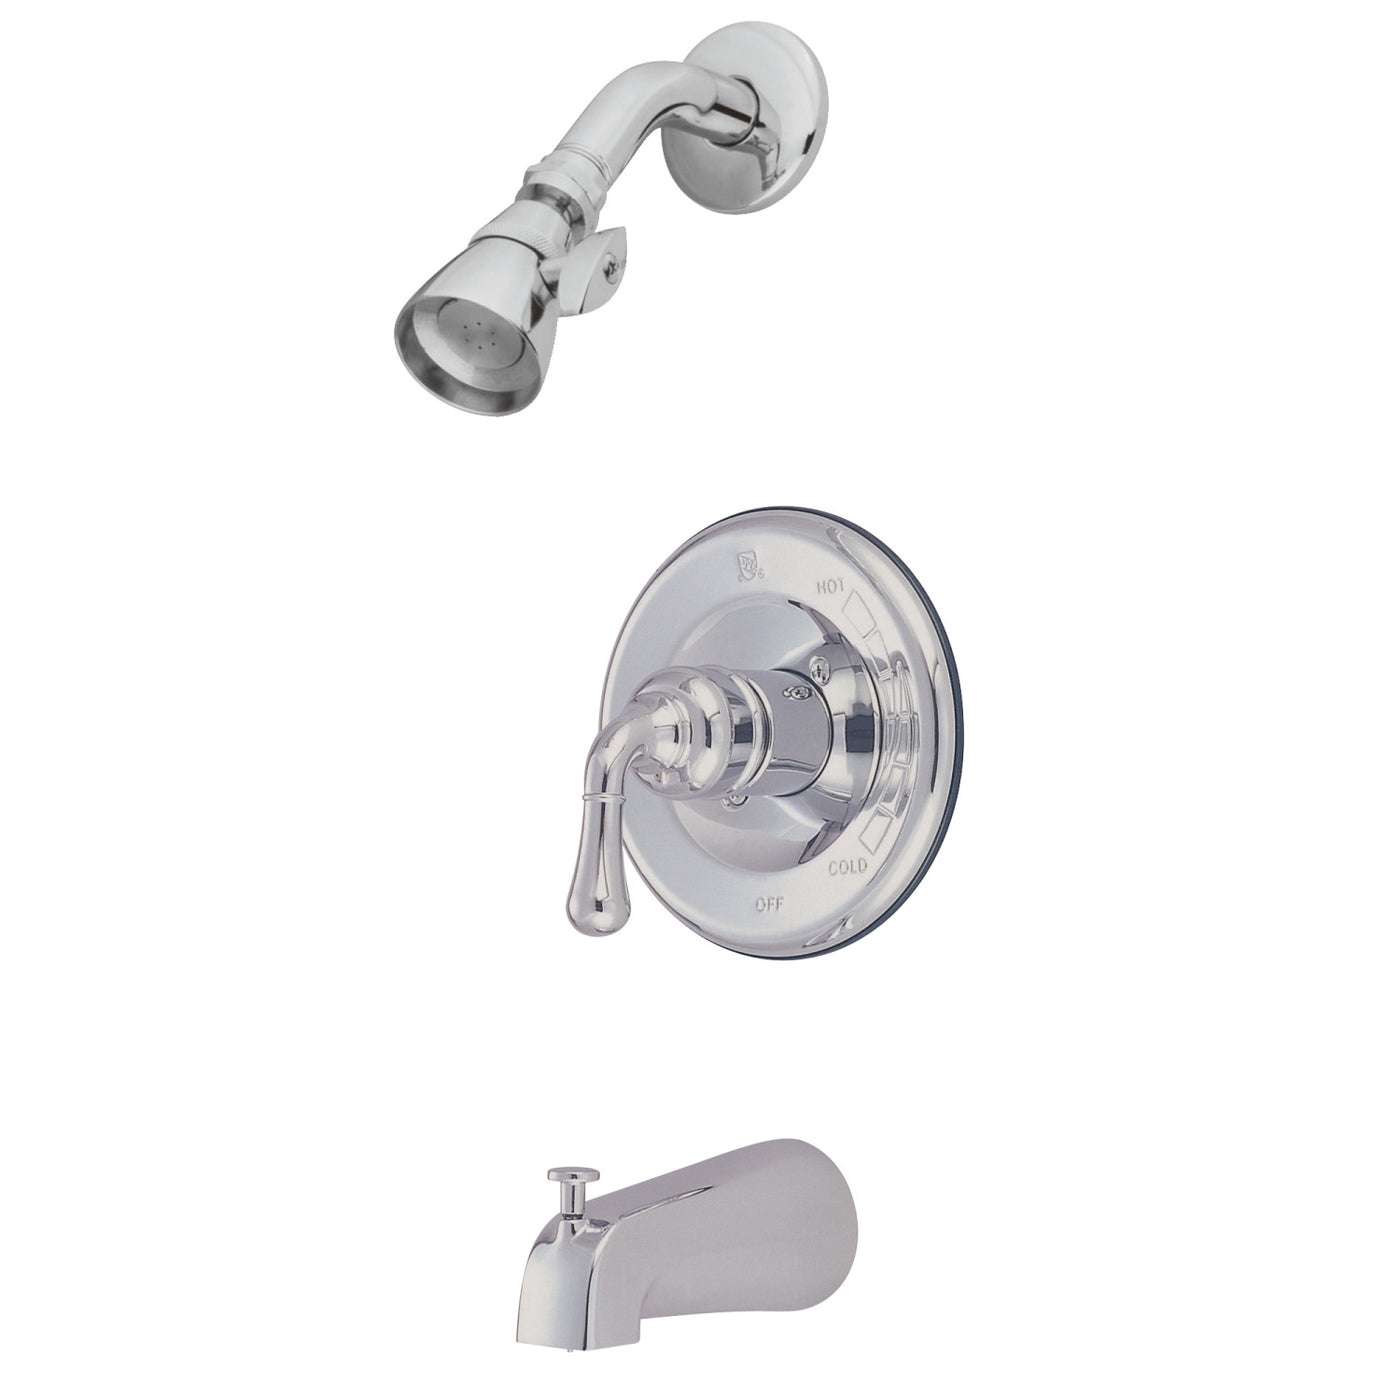 Elements of Design EB1631 Single-Handle Tub and Shower Faucet, Polished Chrome